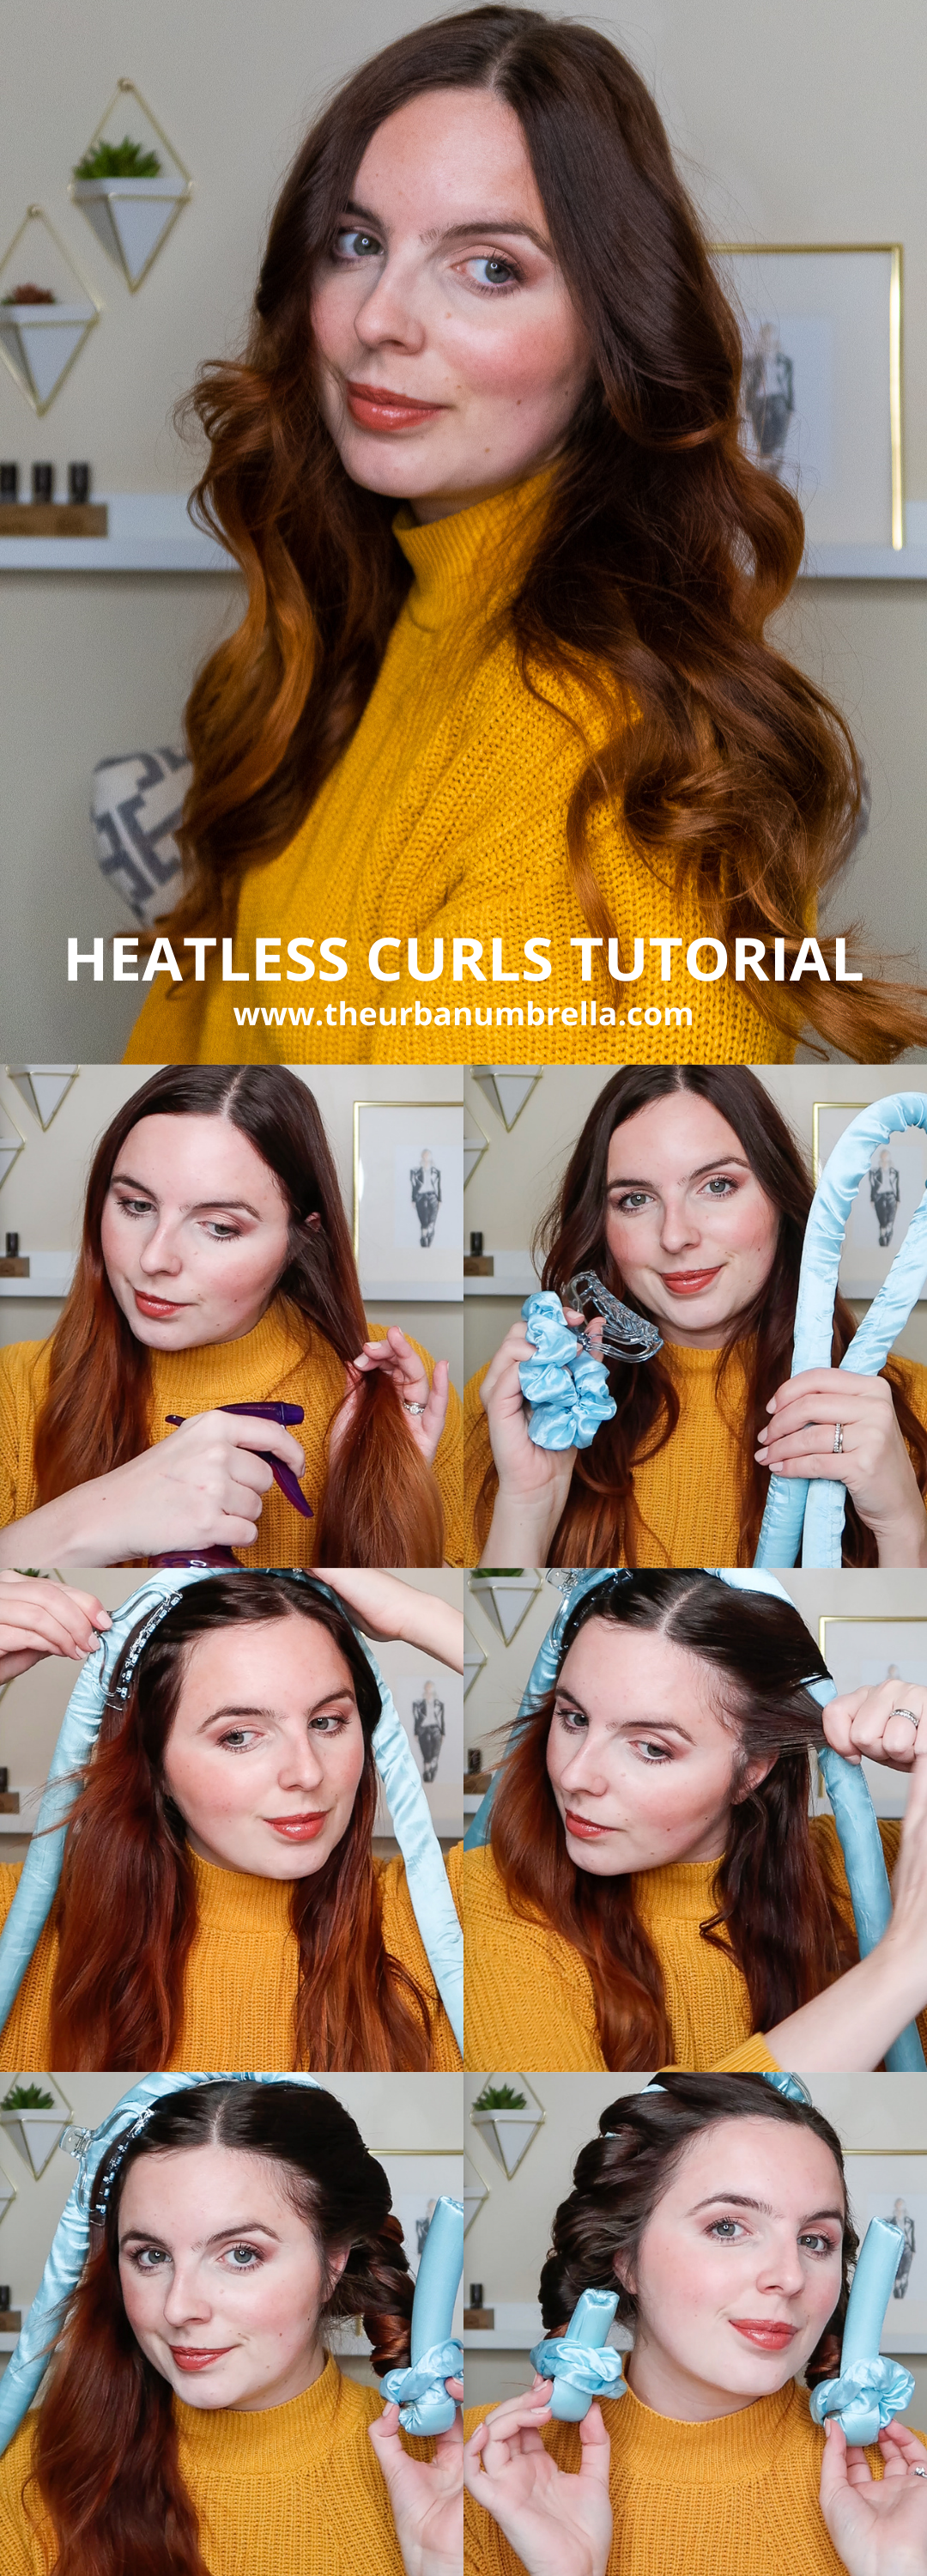 How to Curl Your Hair with a Heatless Curling Rod | Hello, let's glow